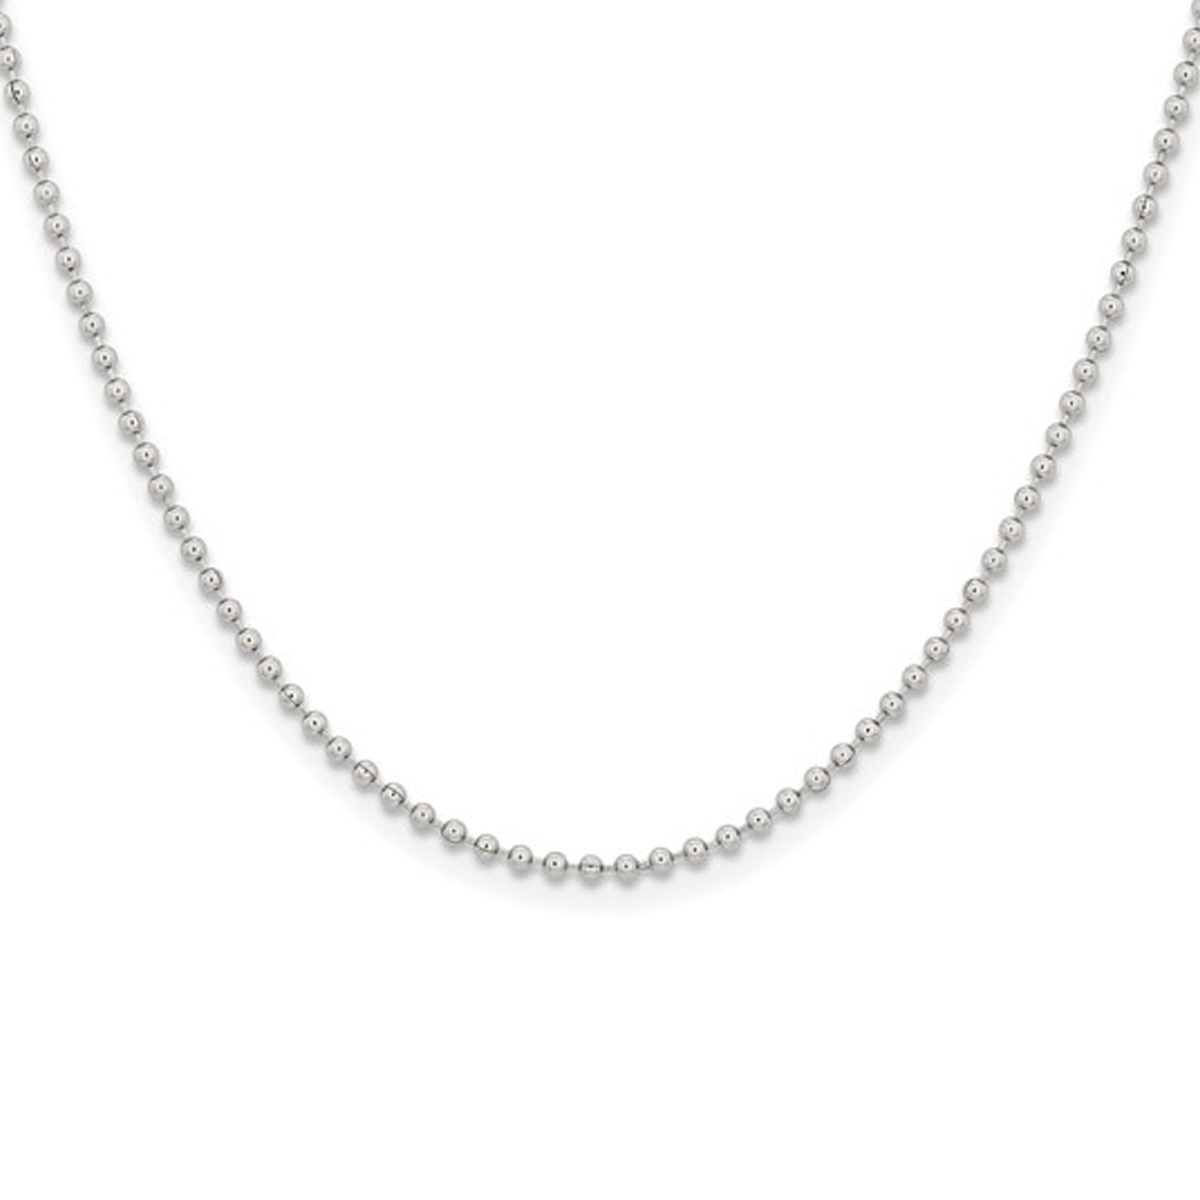 Stainless Steel 20-Inch 2 mm Bead Chain